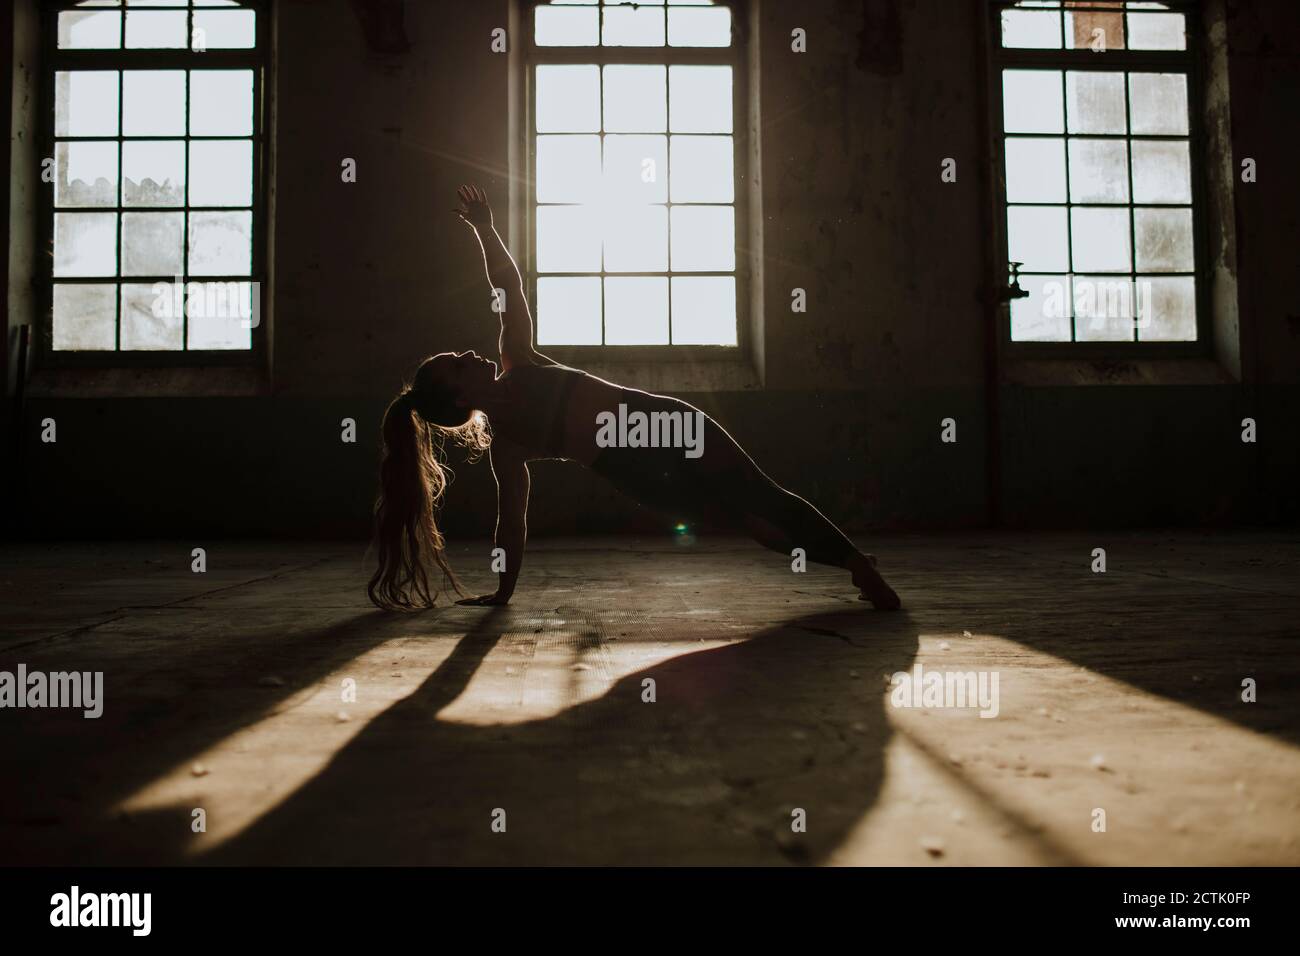 Silhouette of woman doing side plank on floor at abandoned factory Stock Photo